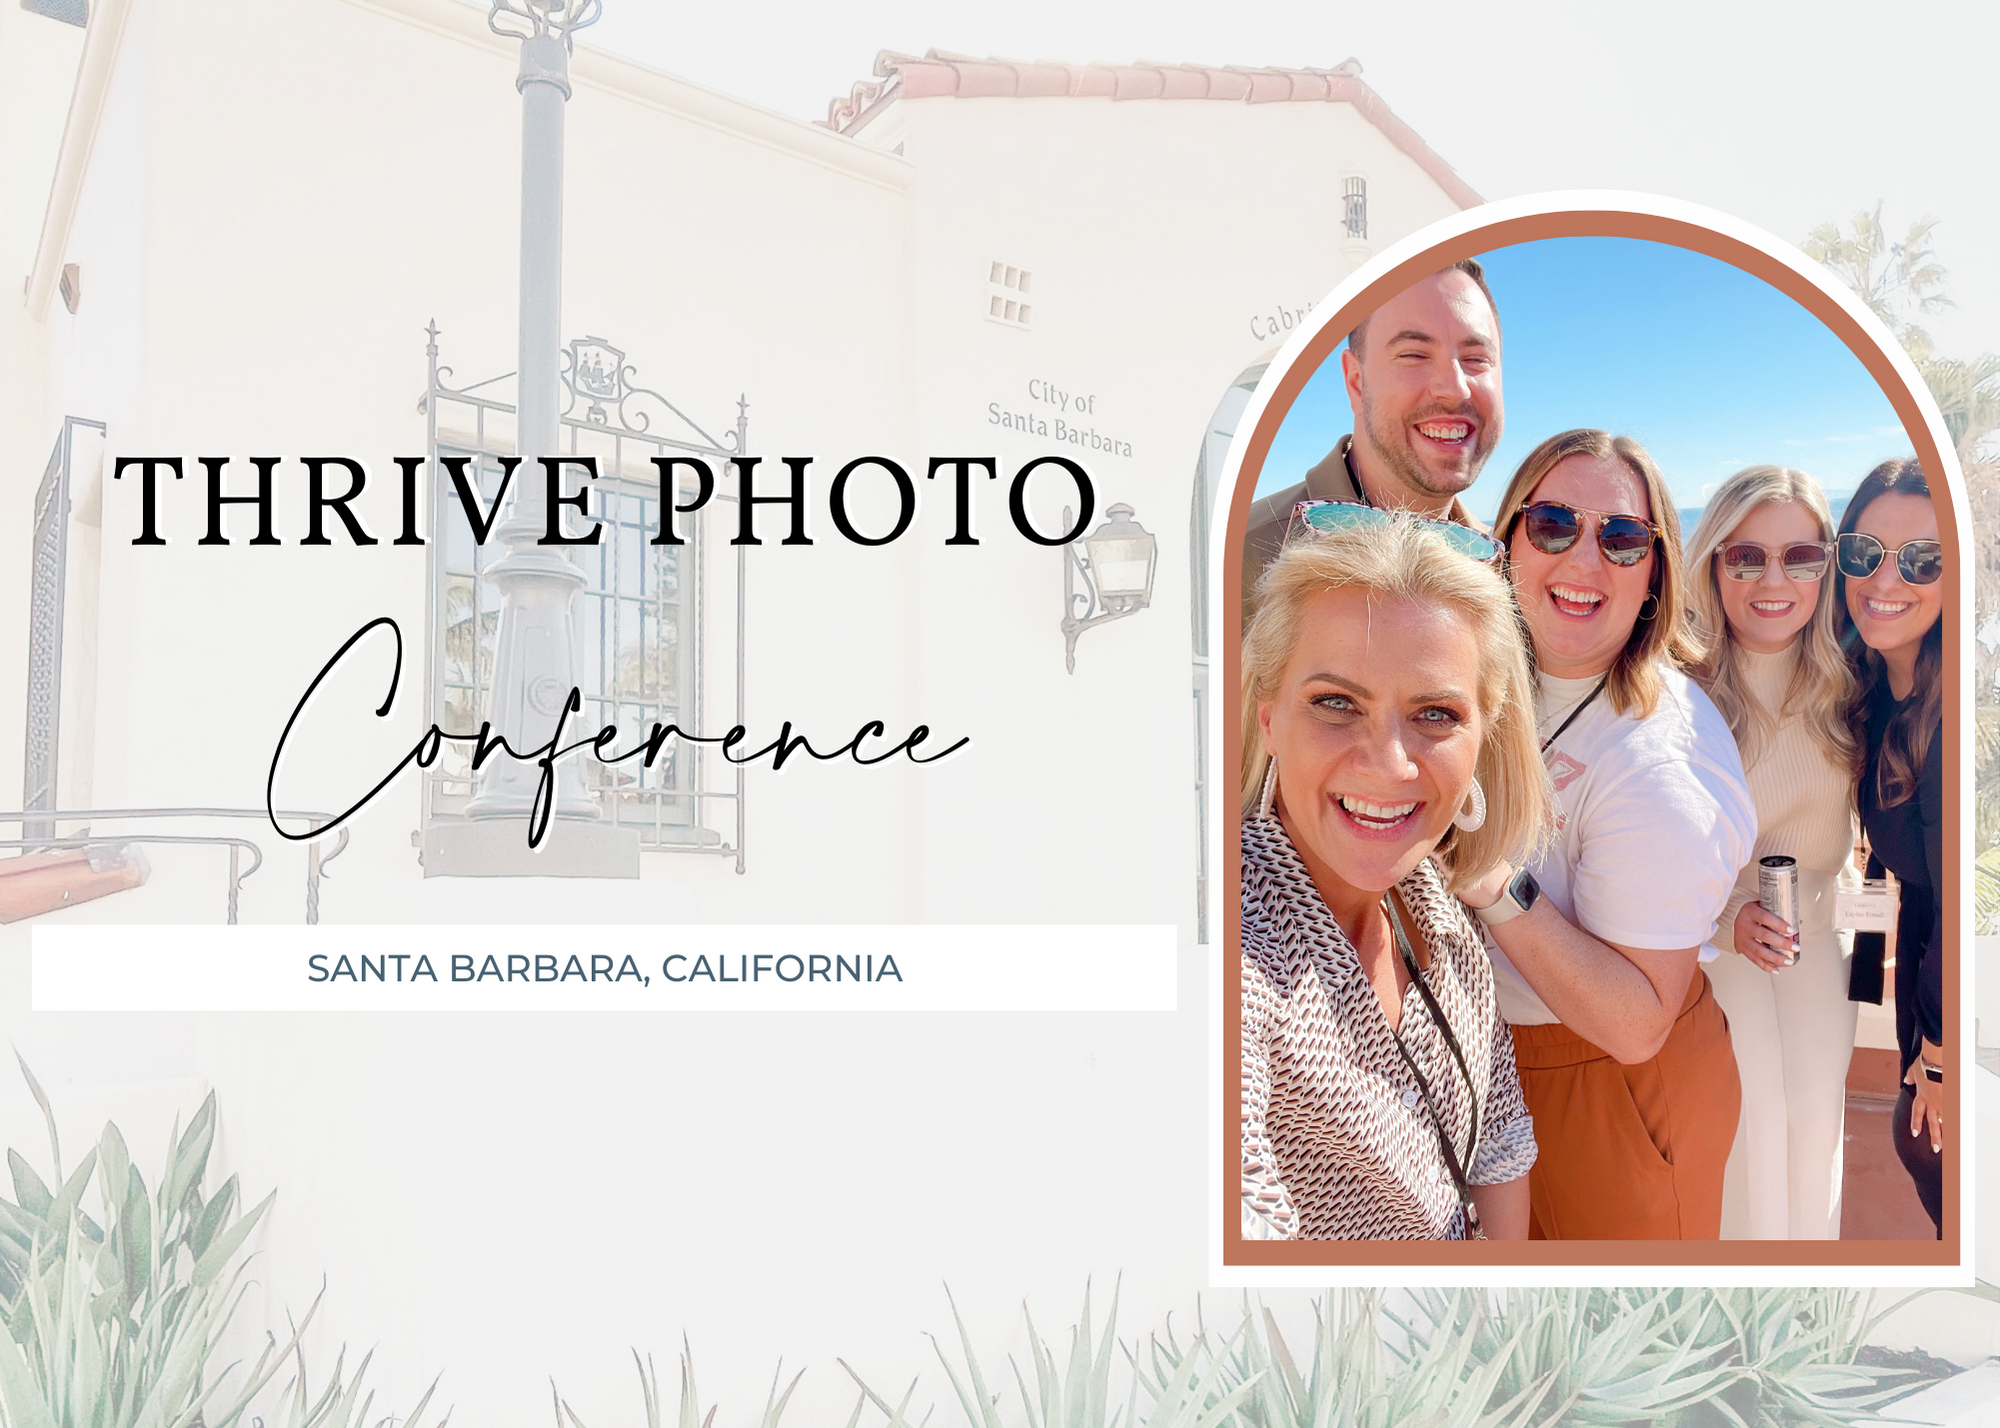 thrive photography conference